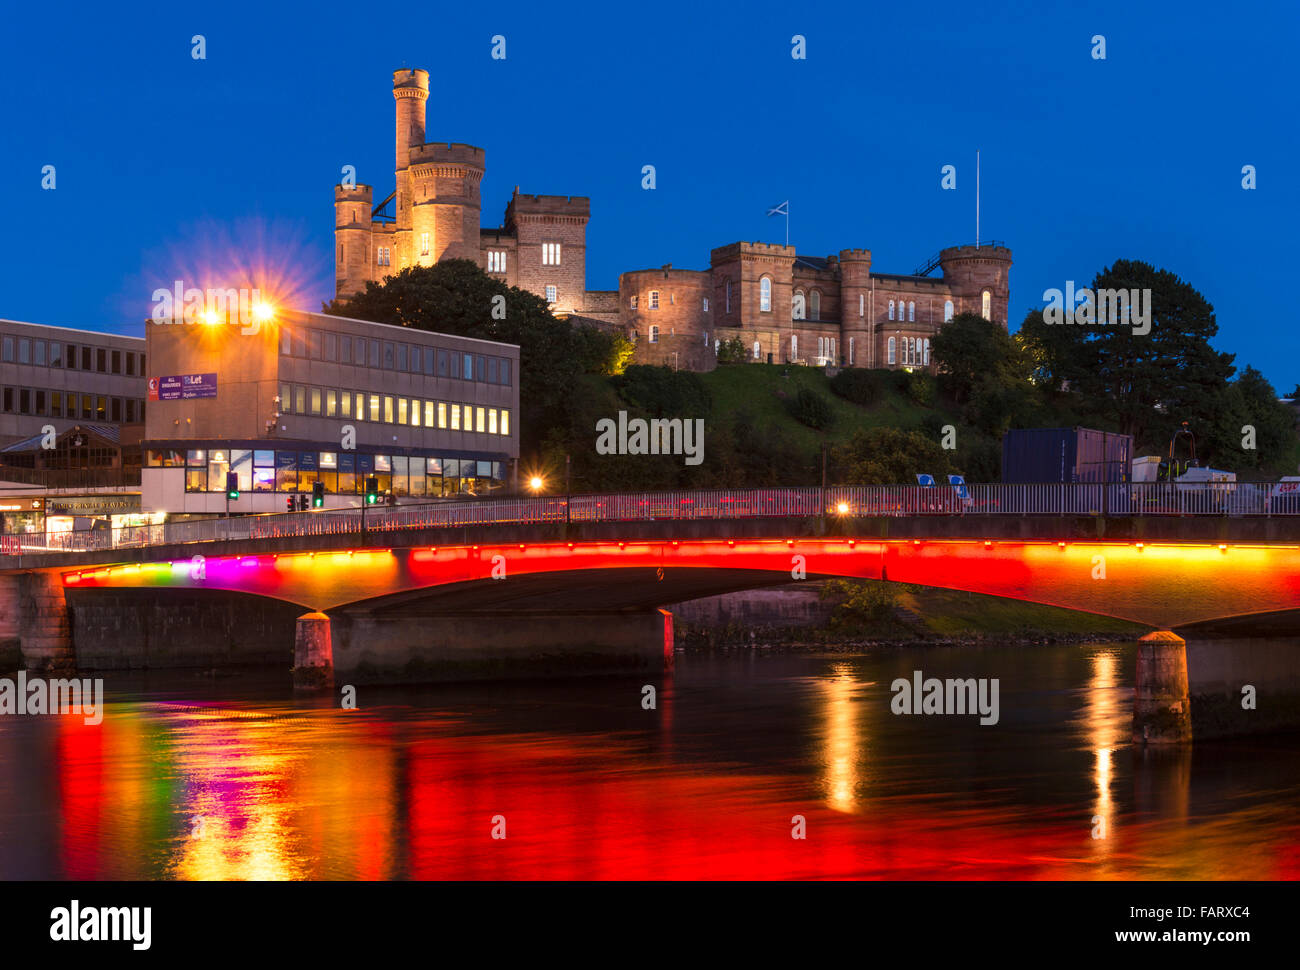 Inverness castle illuminated at night from Huntly street on the banks of the River Ness Highlands of Scotland EU UK GB Europe Stock Photo